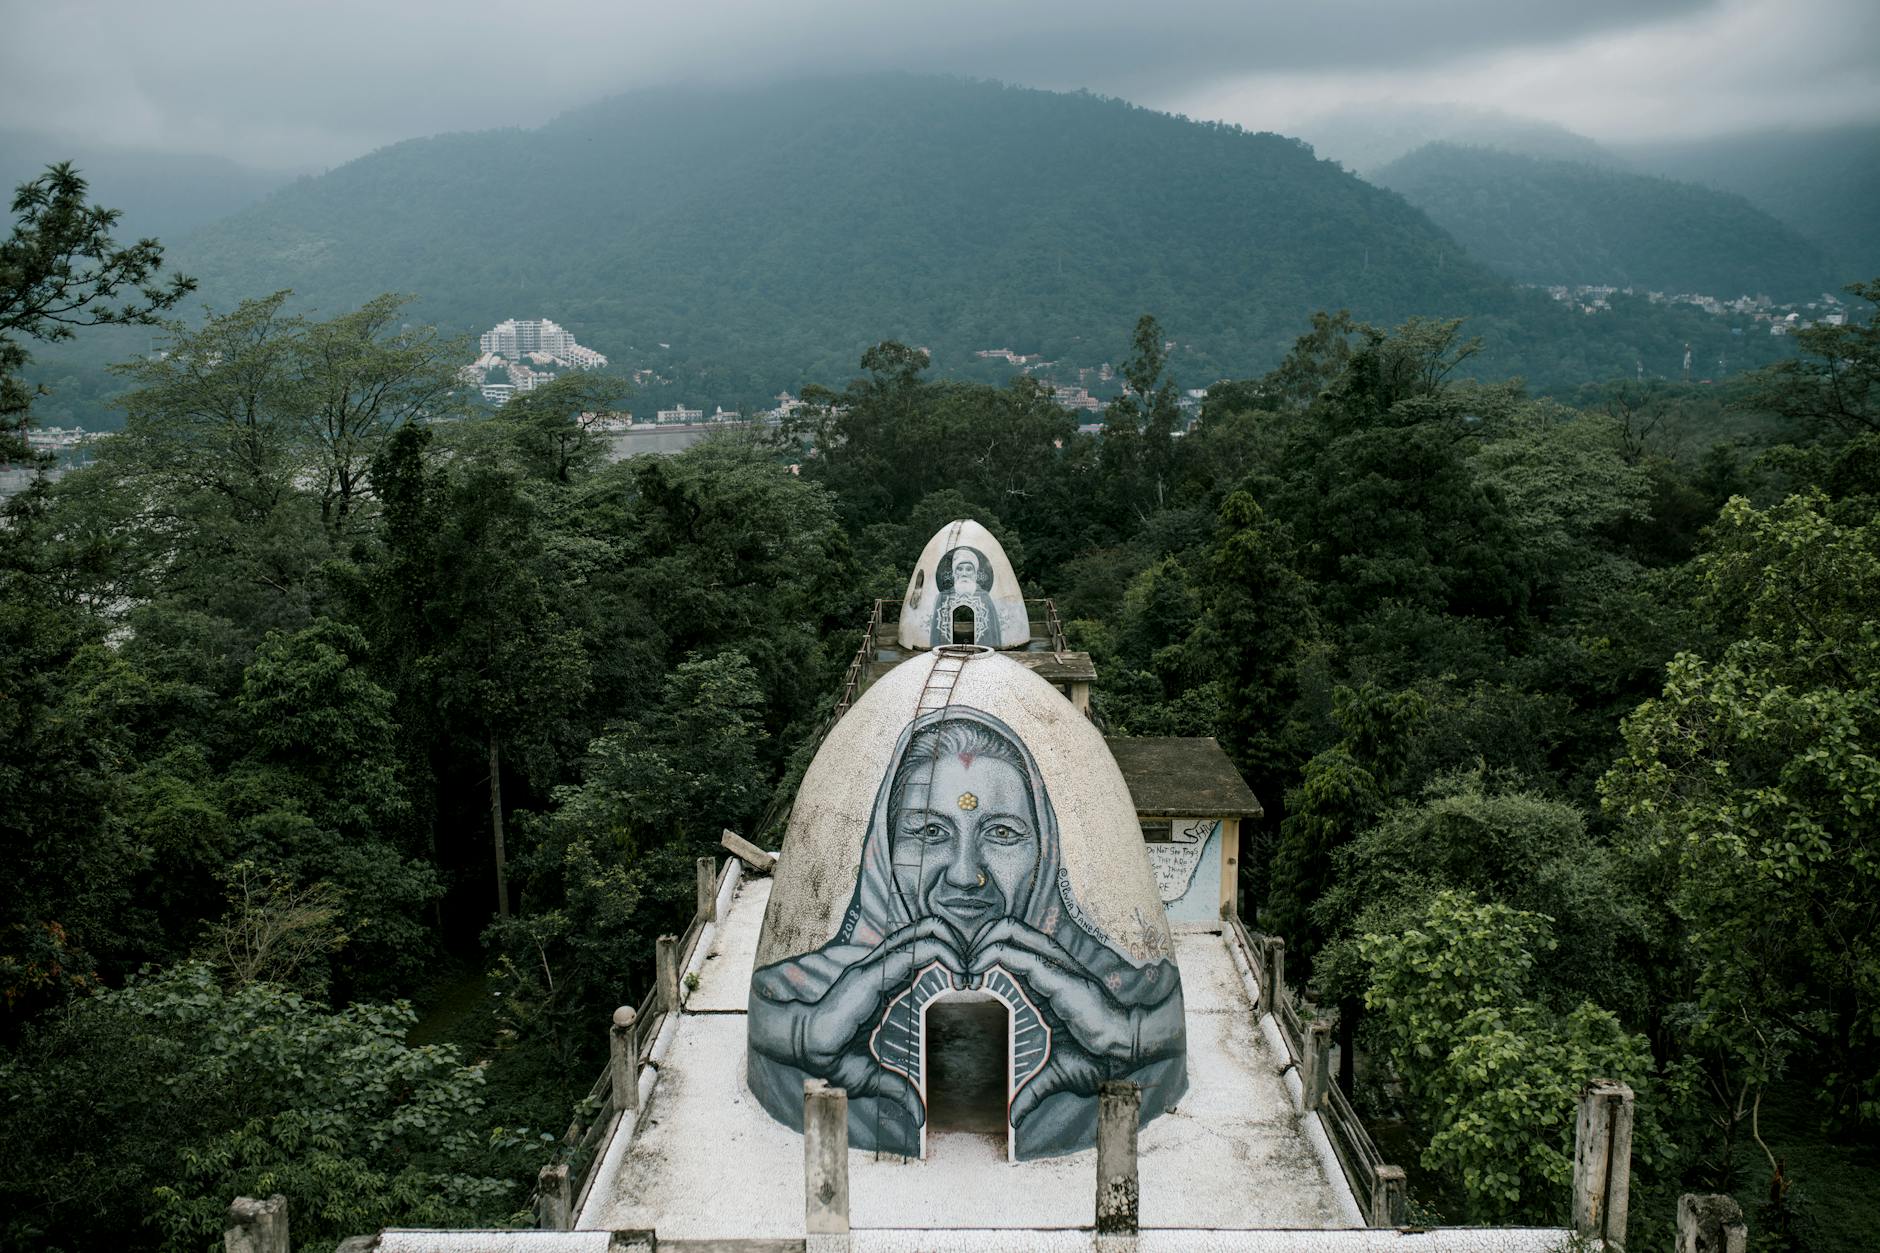 rooftop meditation dome surrounded by lush green trees in mountains